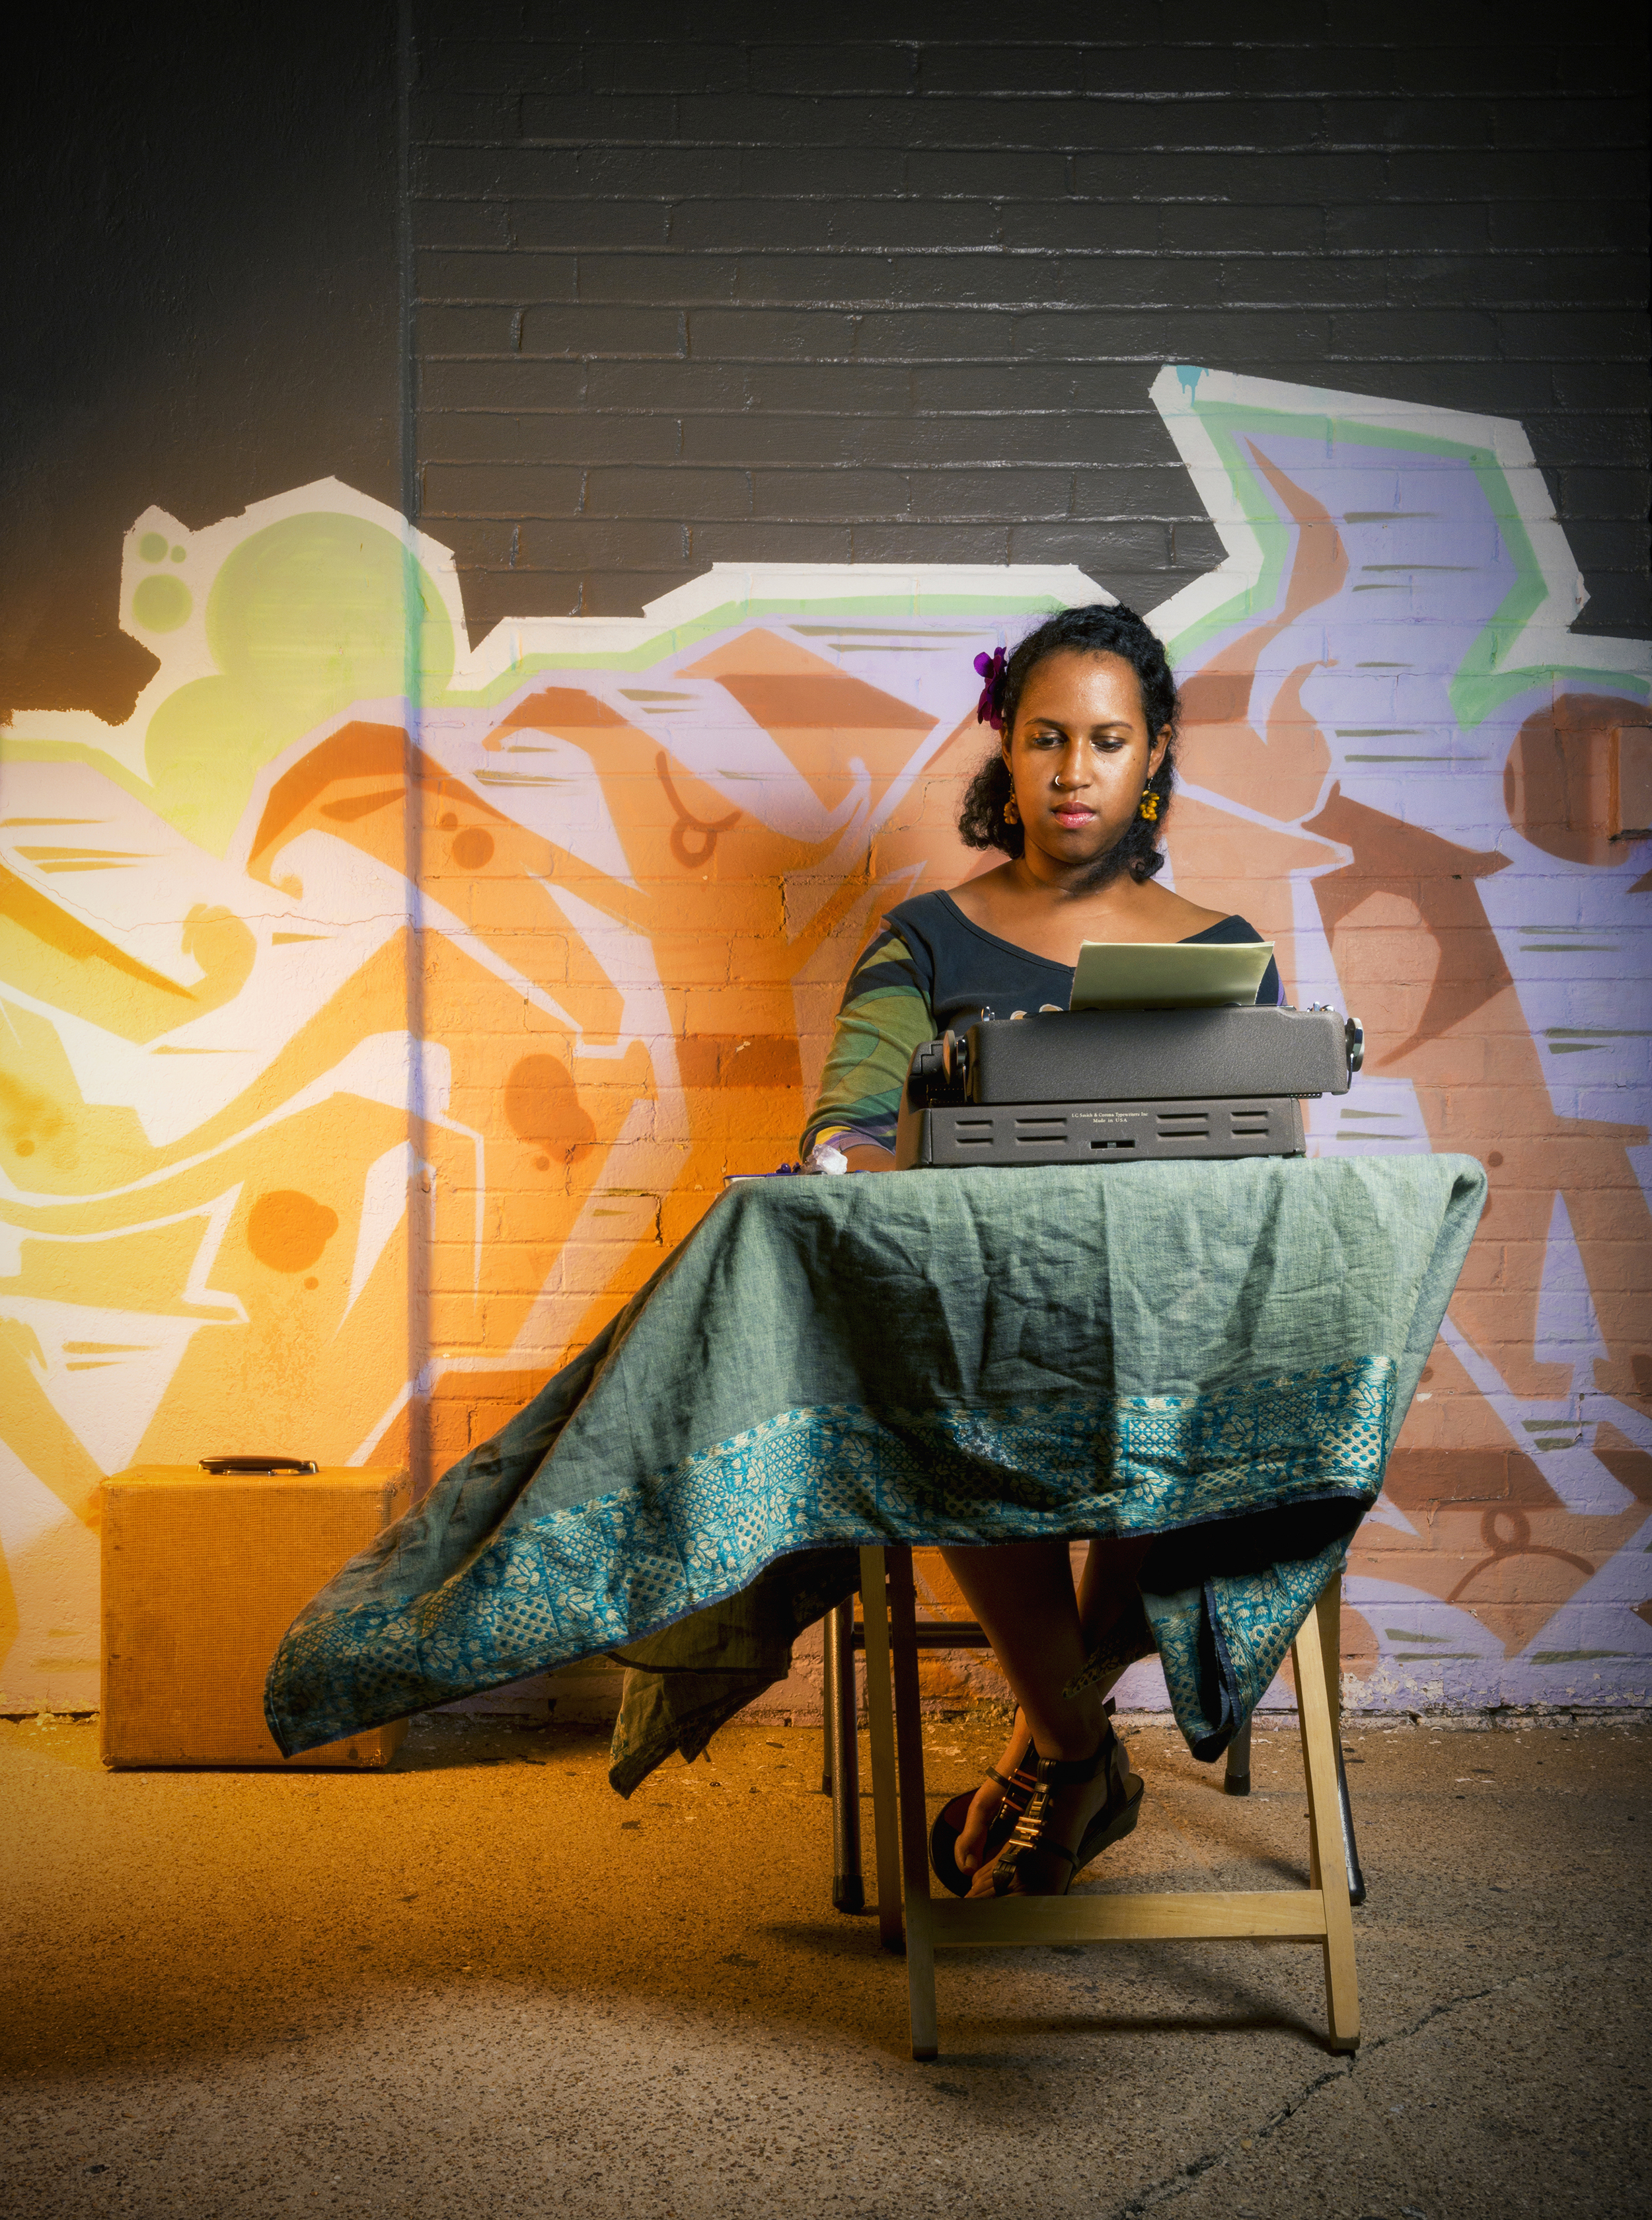  Fatima Hirsi types a poem on Lower Greenville Avenue in Dallas, TX.  After meeting a street poet in Austin, TX, Hirsi began spontaneously typing poems for passersby in Dallas.  Her donation-based service asked only that a patron offer a single perso